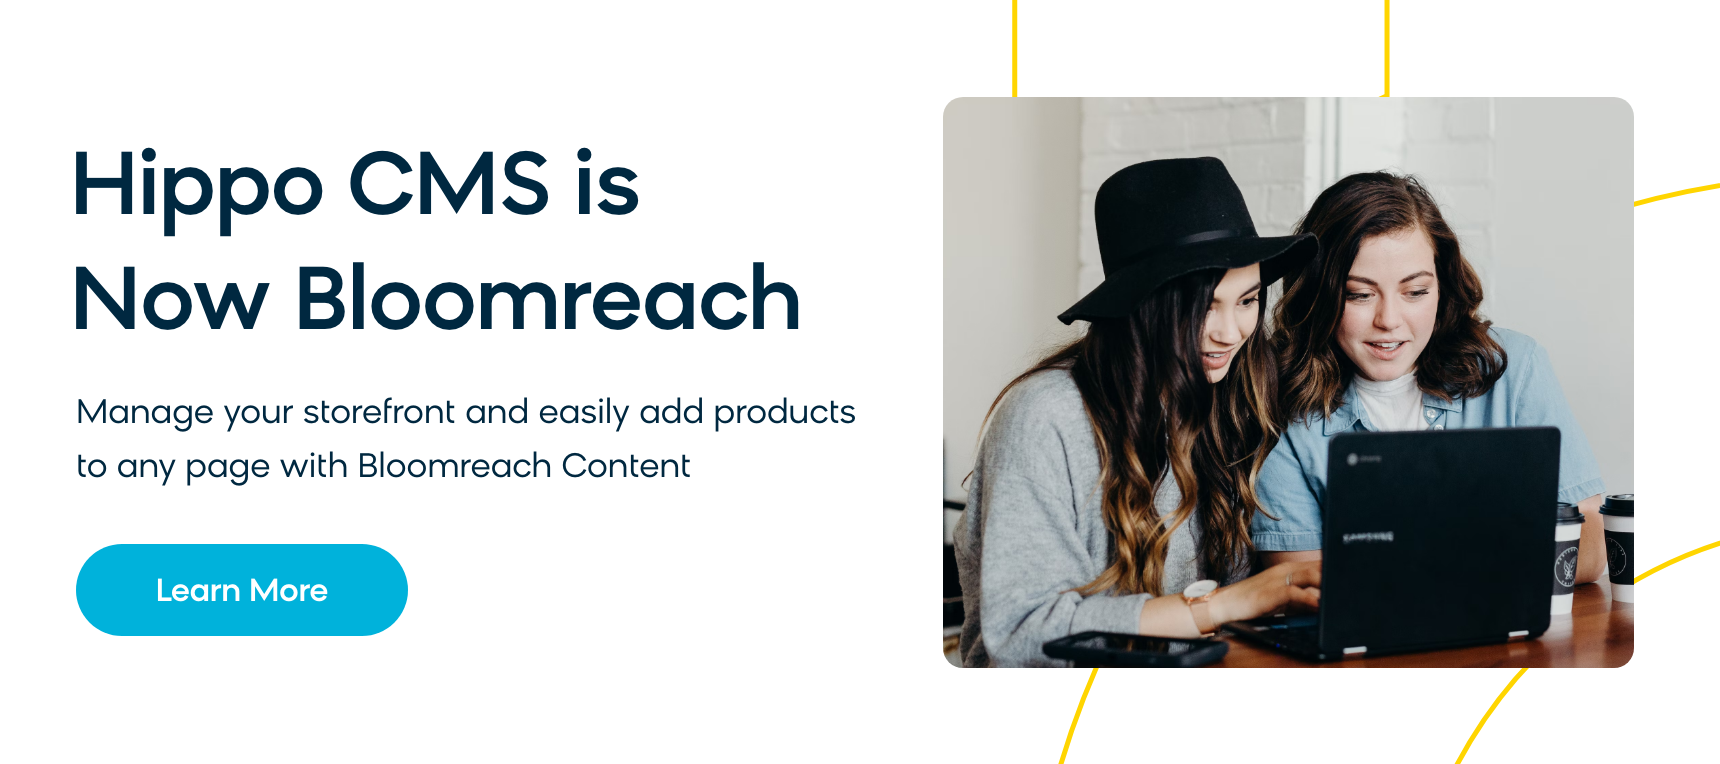 Hippo CMS is now Bloomreach Content